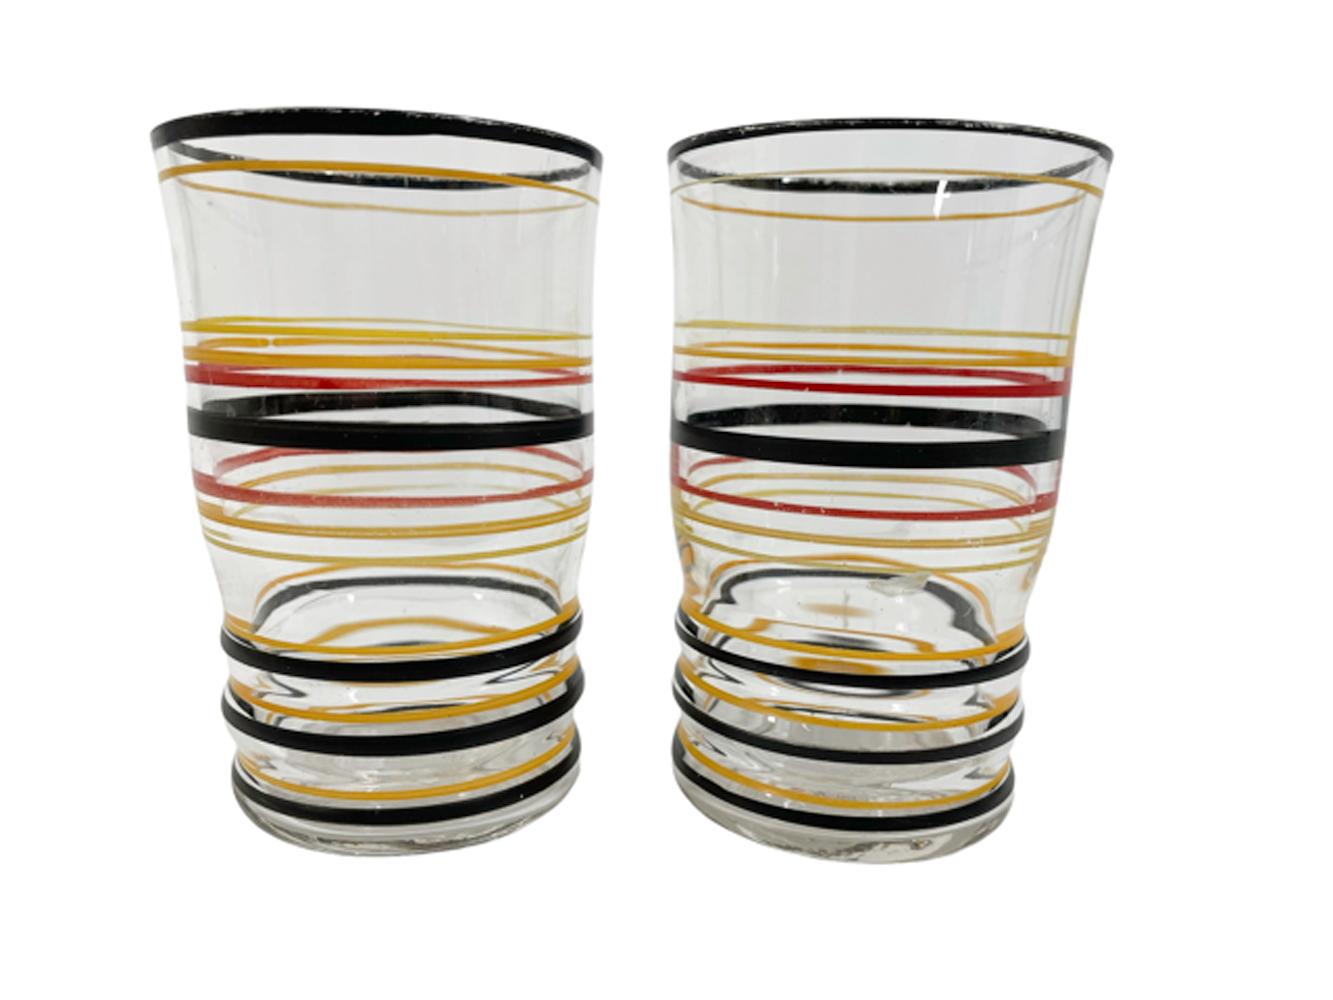 American Art Deco Cocktail Shaker Set with Hand Painted Black, Red, Orange & Yellow Bands For Sale